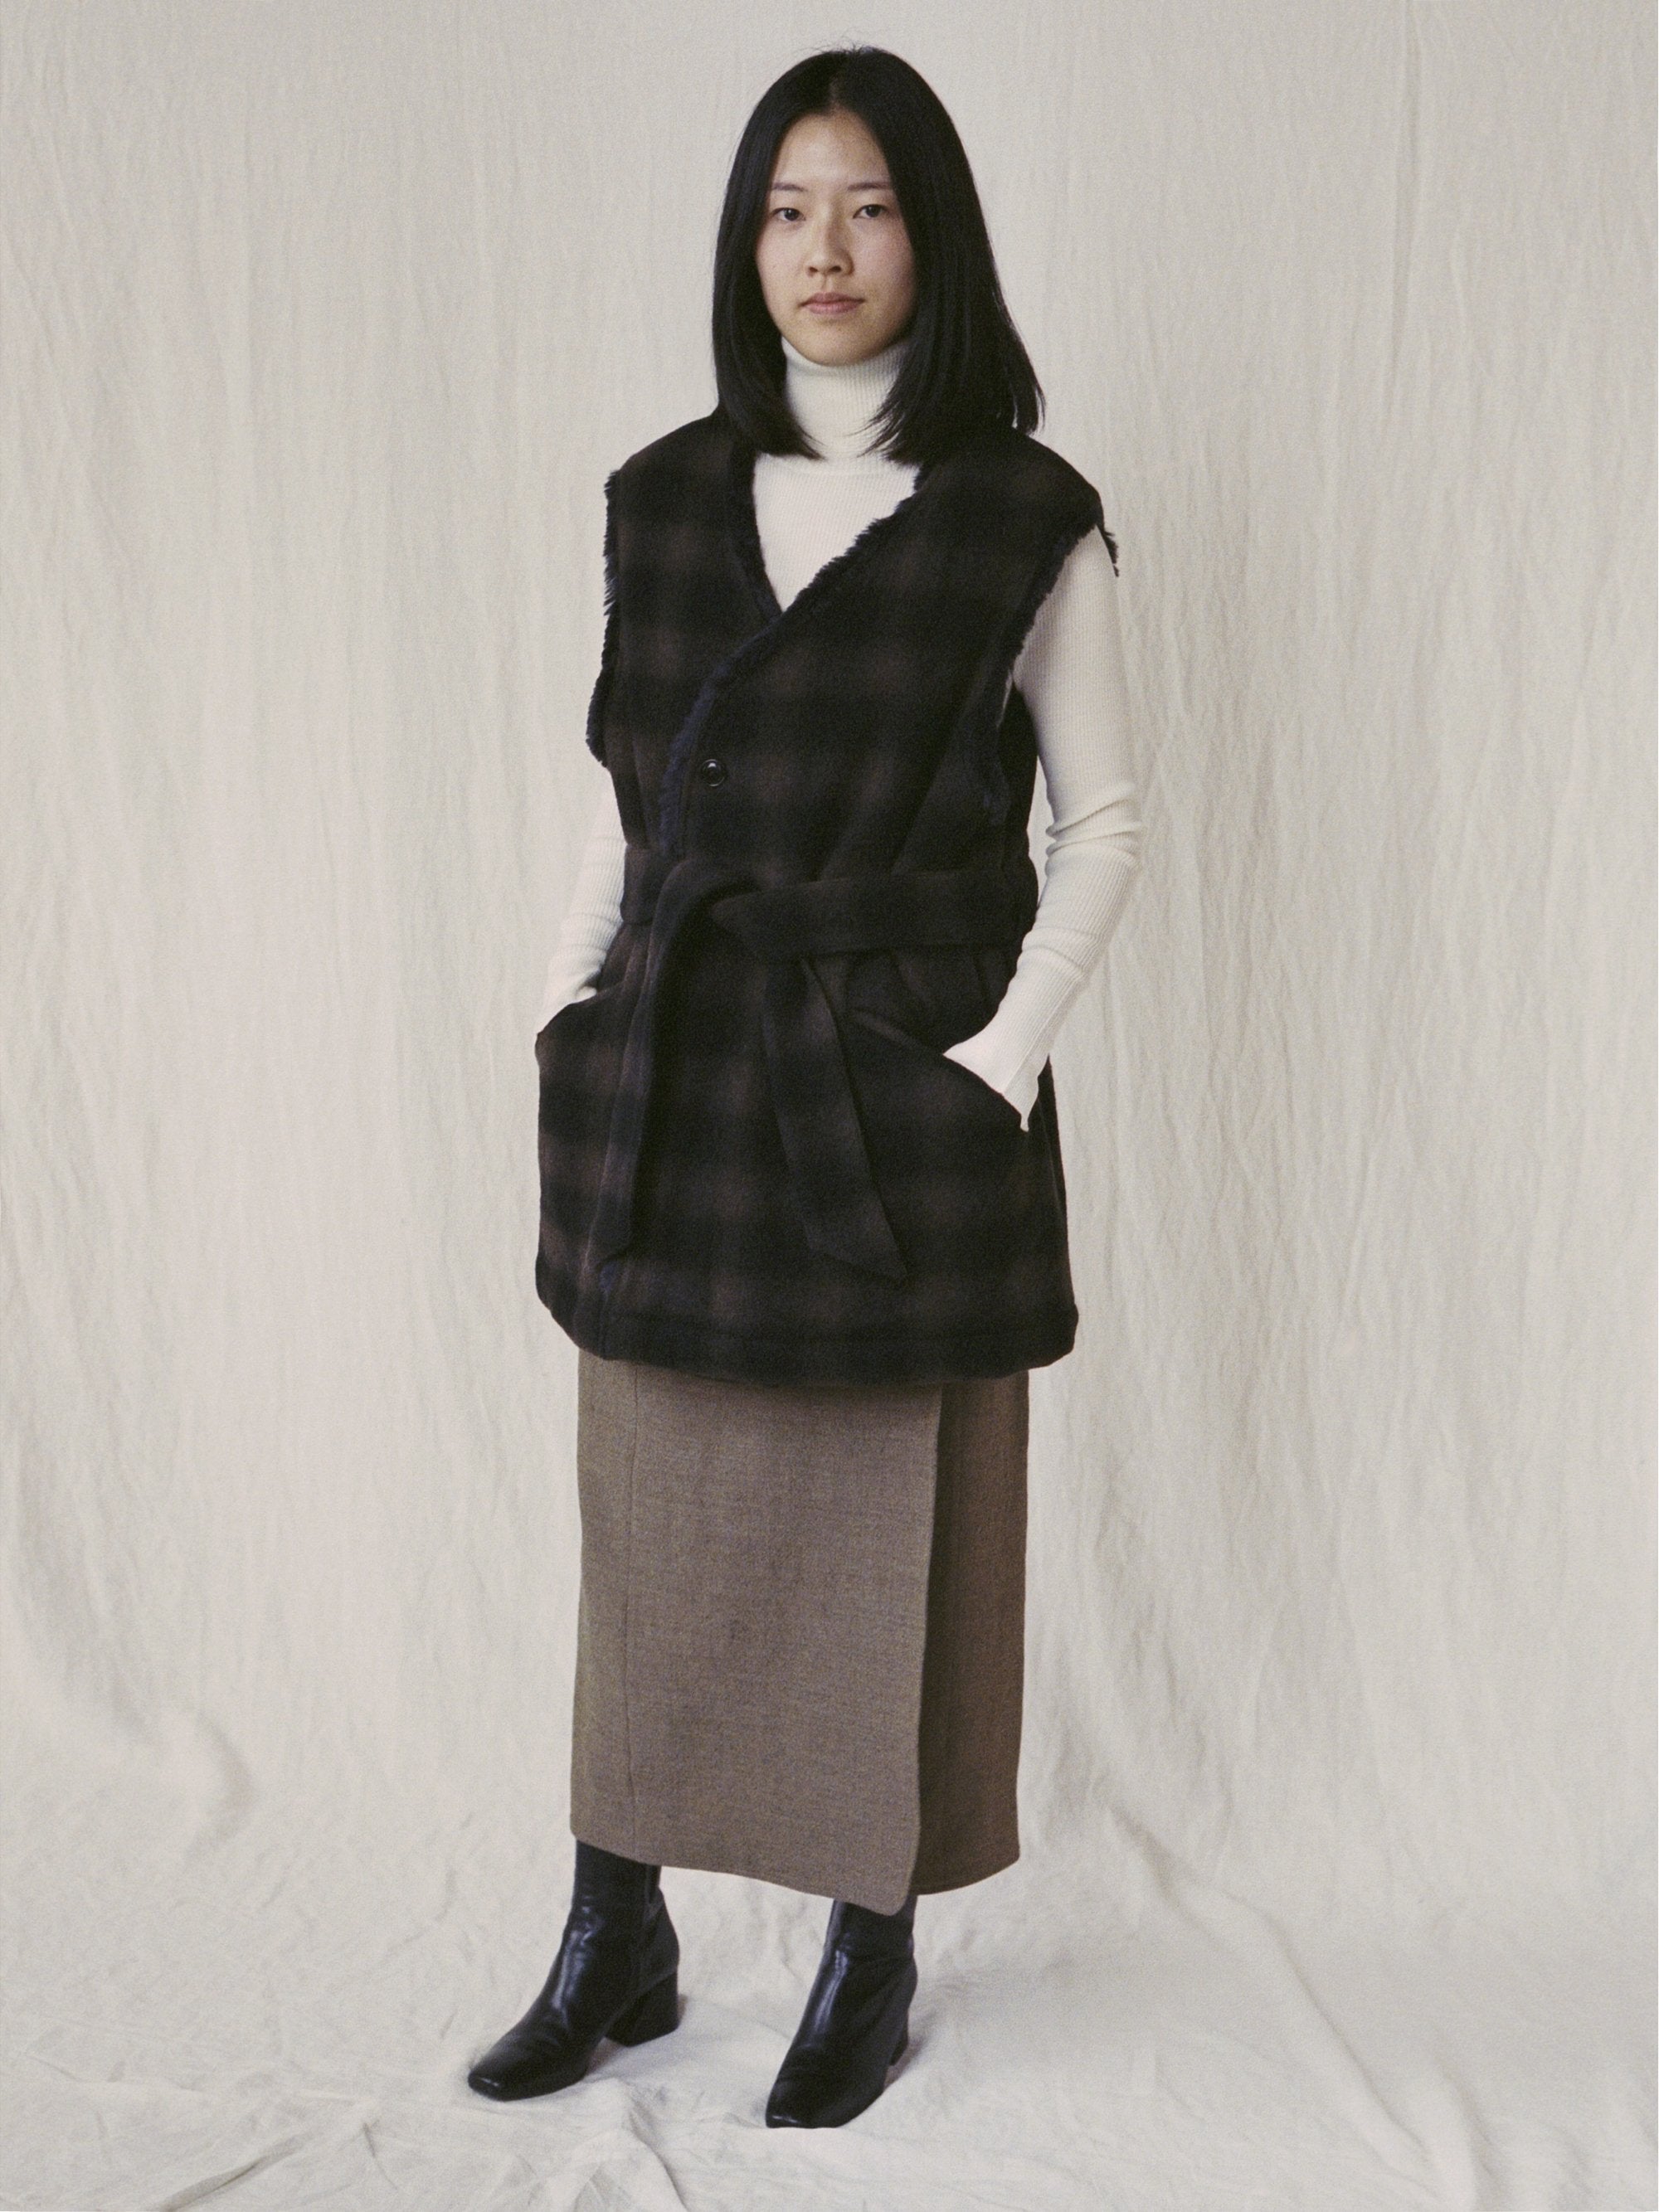 Namu Shop - ts(s) Boa Lined Belted Vest - Ombre Plaid Wool